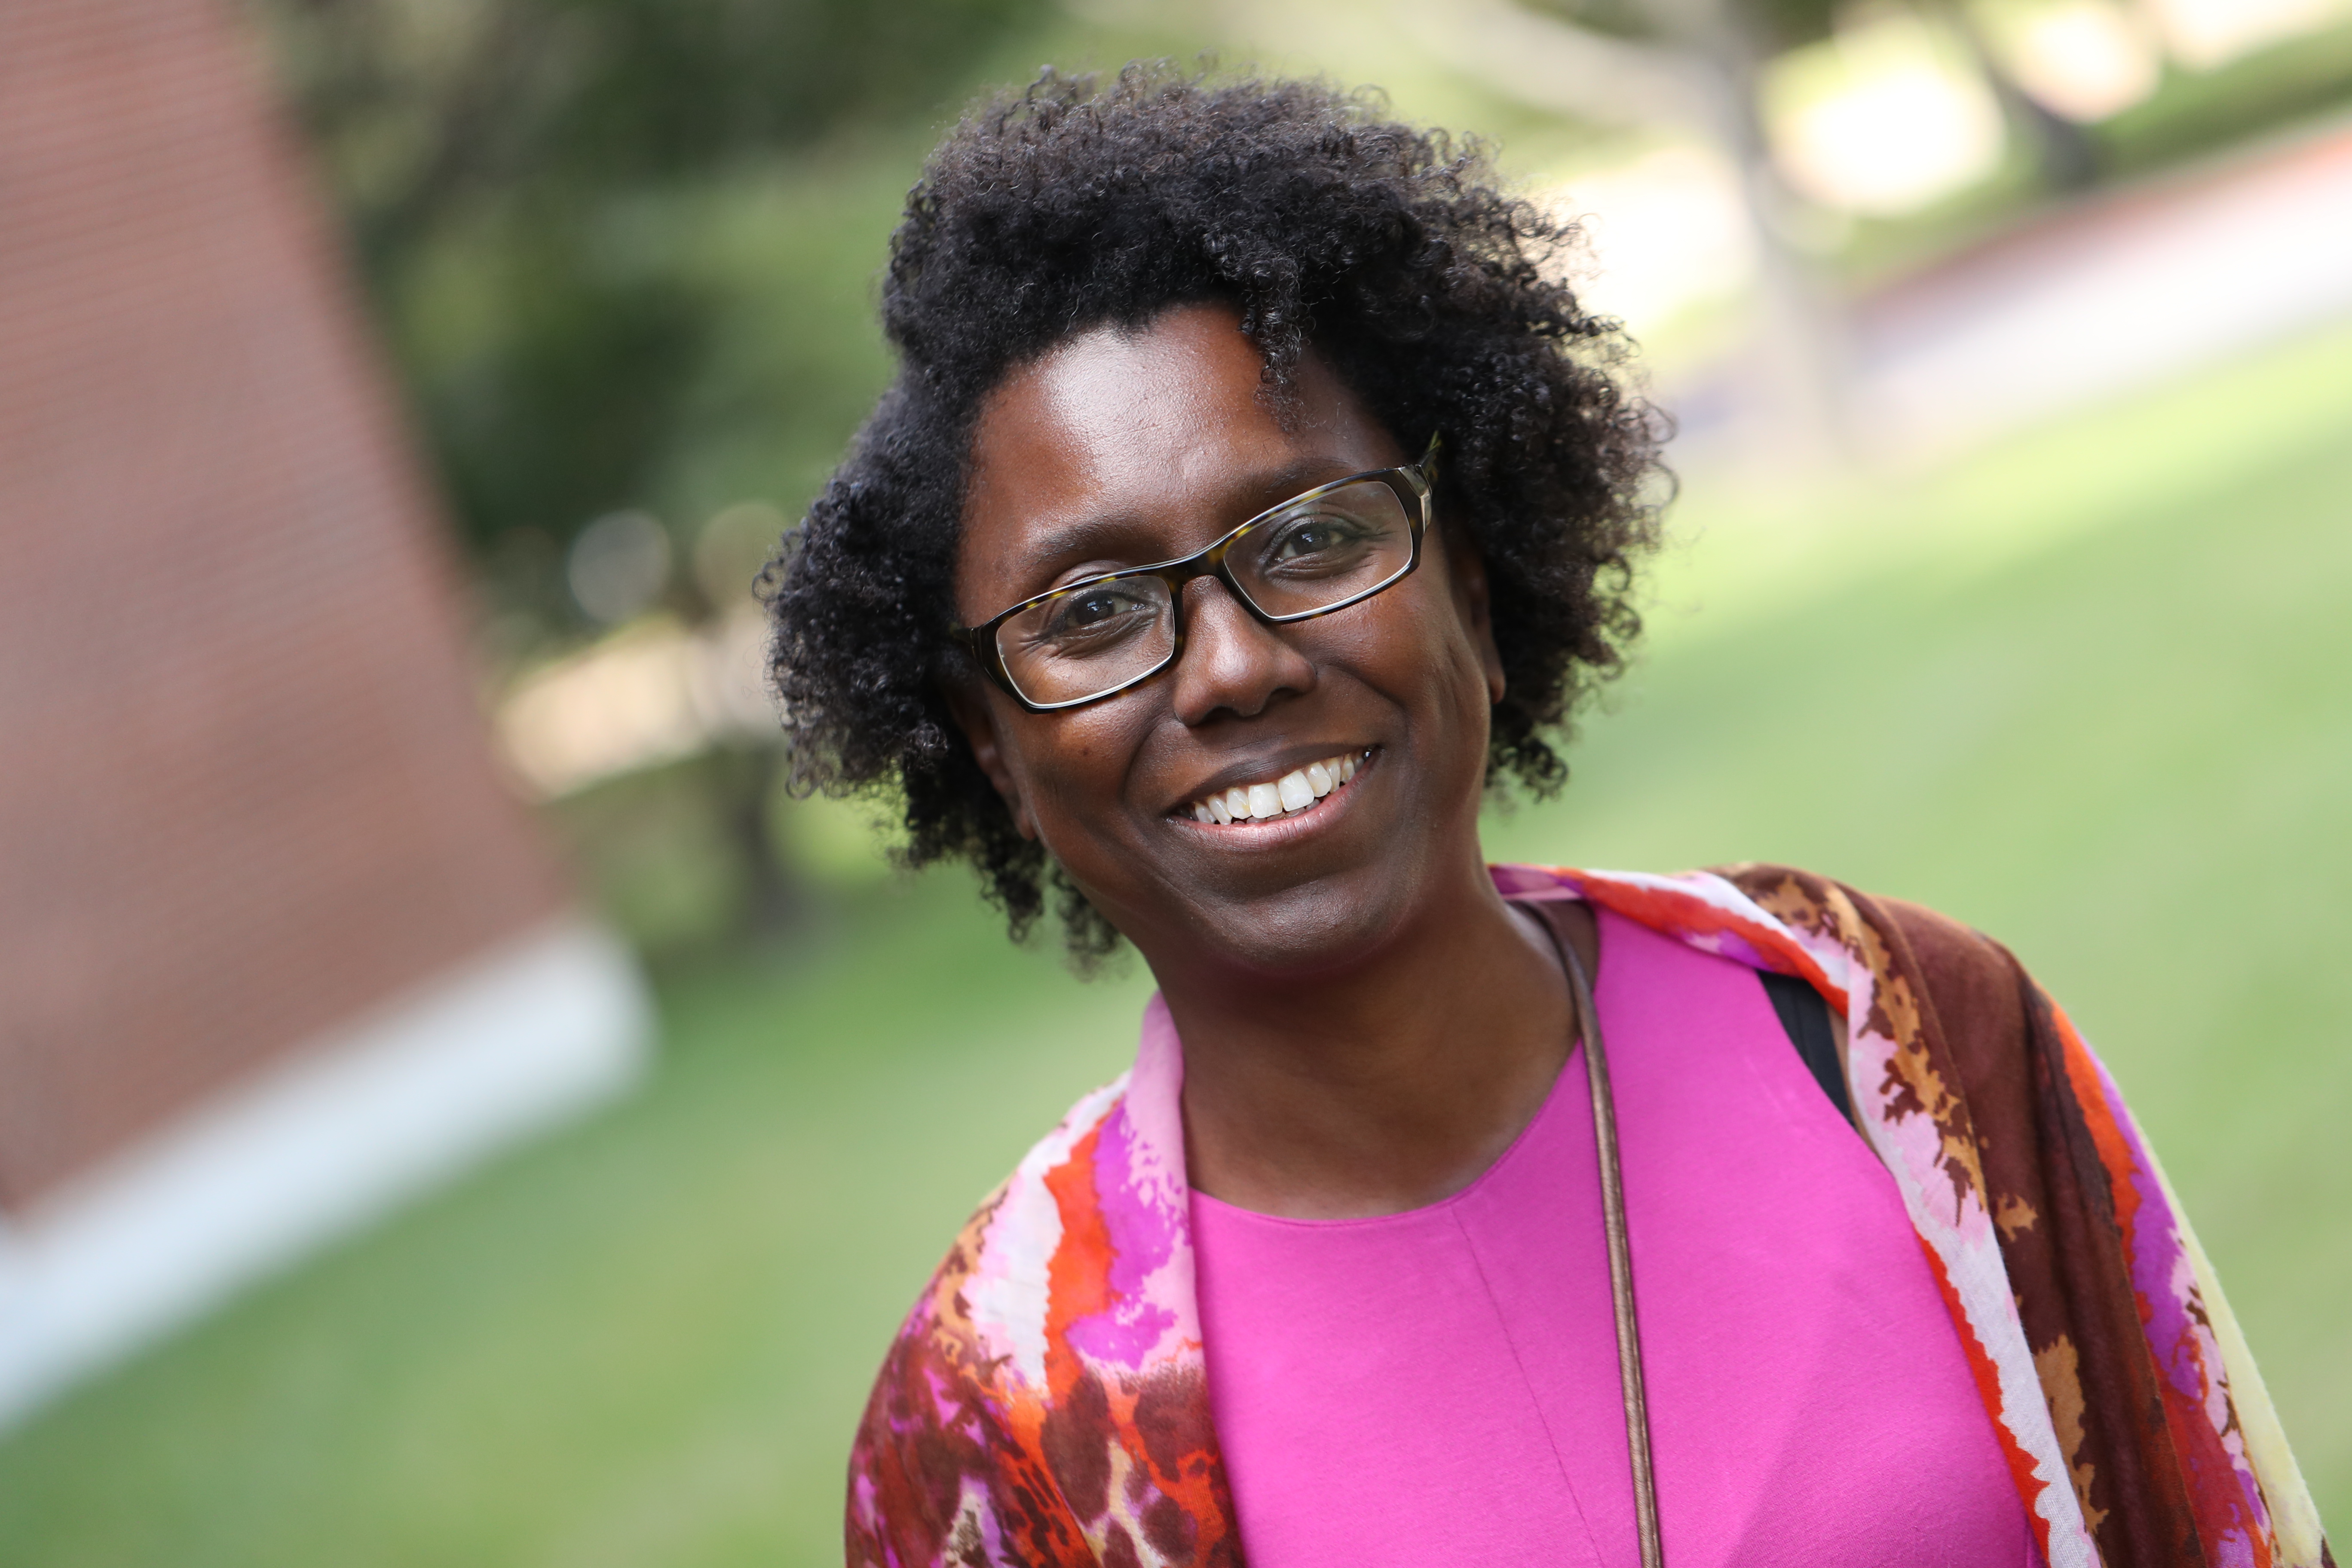 Stephanie Boddie, Assistant Professor of Church and Community Ministries